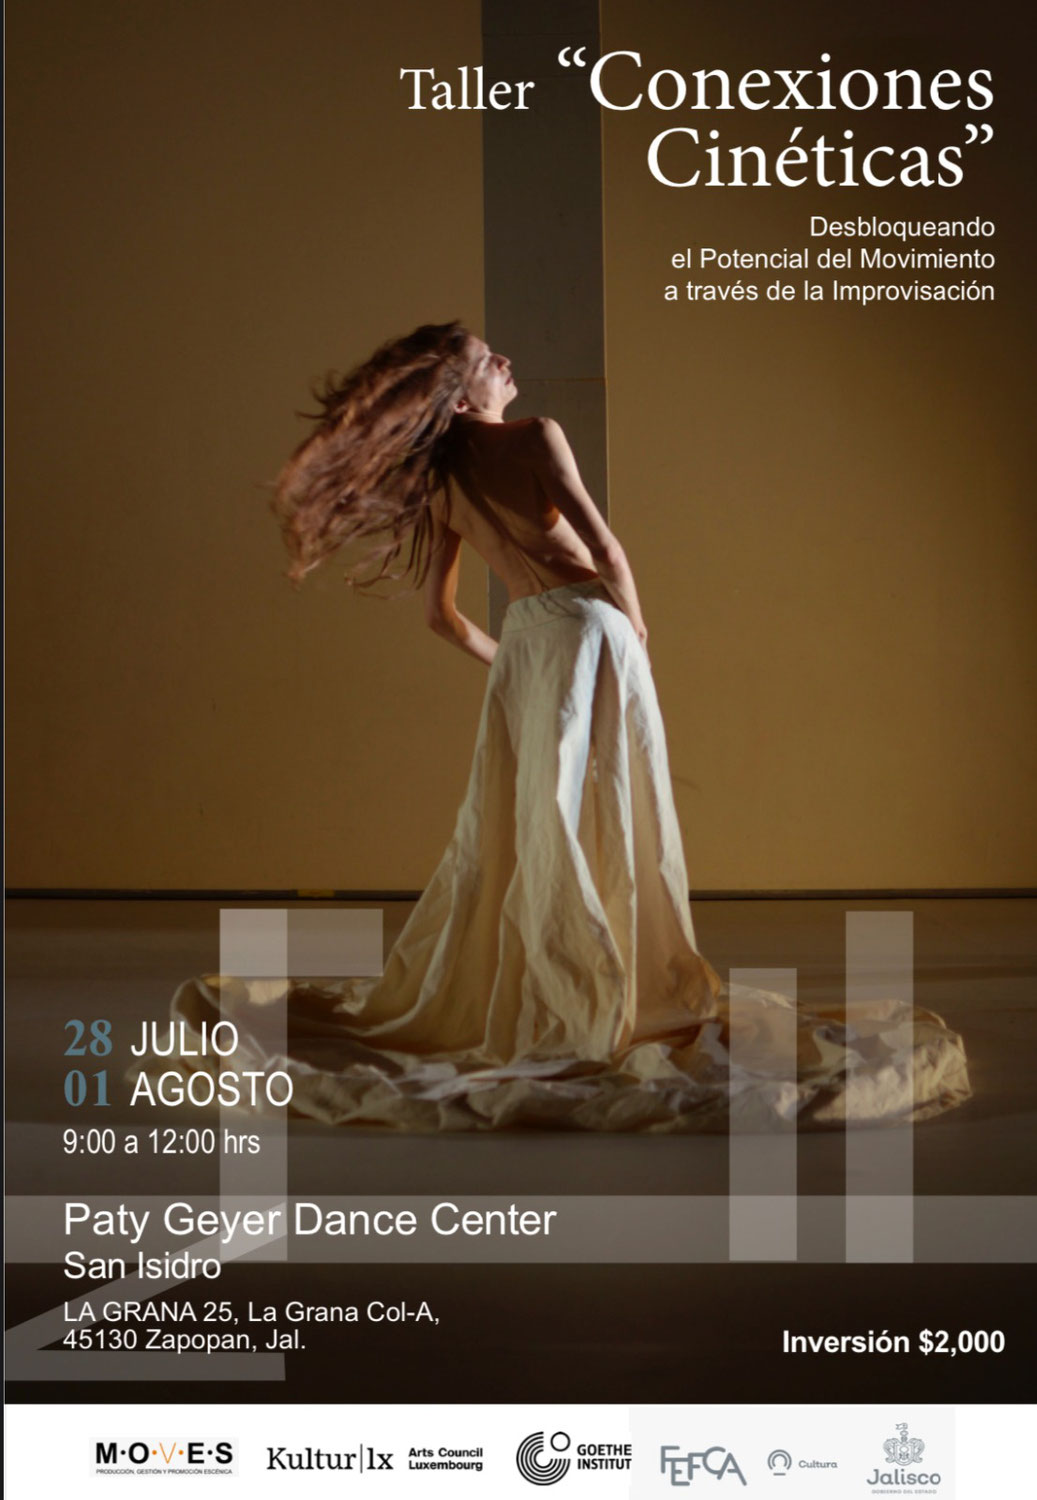 "Immerse Yourself in the Dance: Join Saeed's Inspiring Workshop at Paty Geyer Dance Center!" Guadalajara.